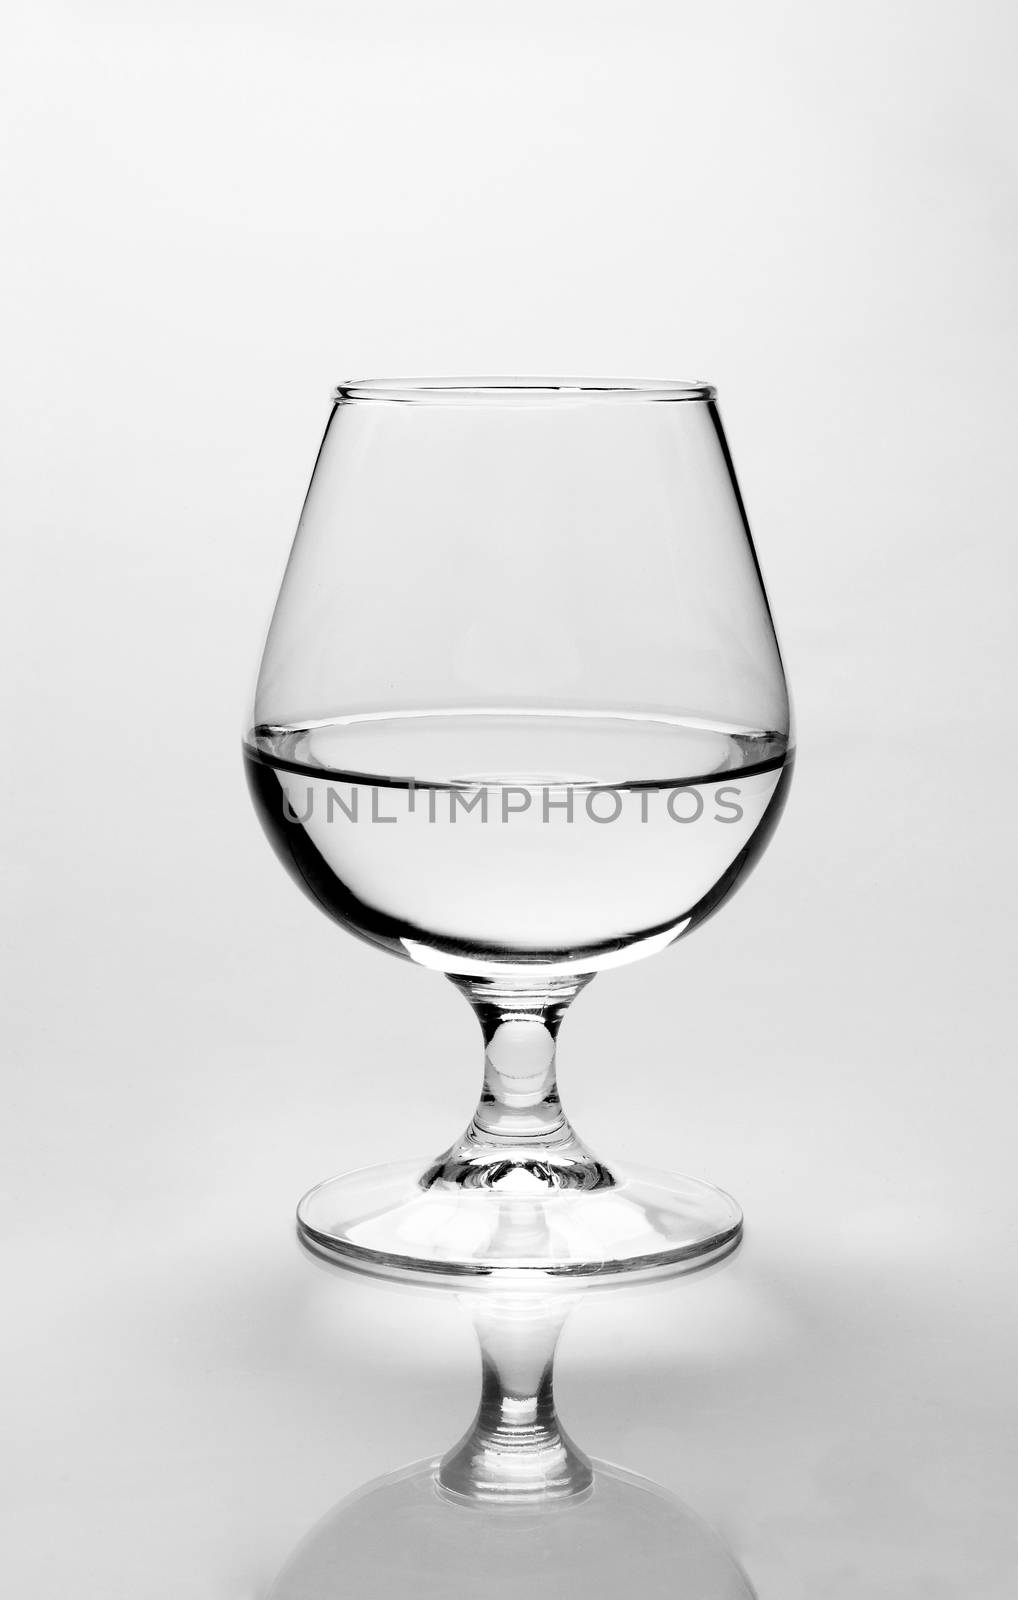 Crystal clear glass of water